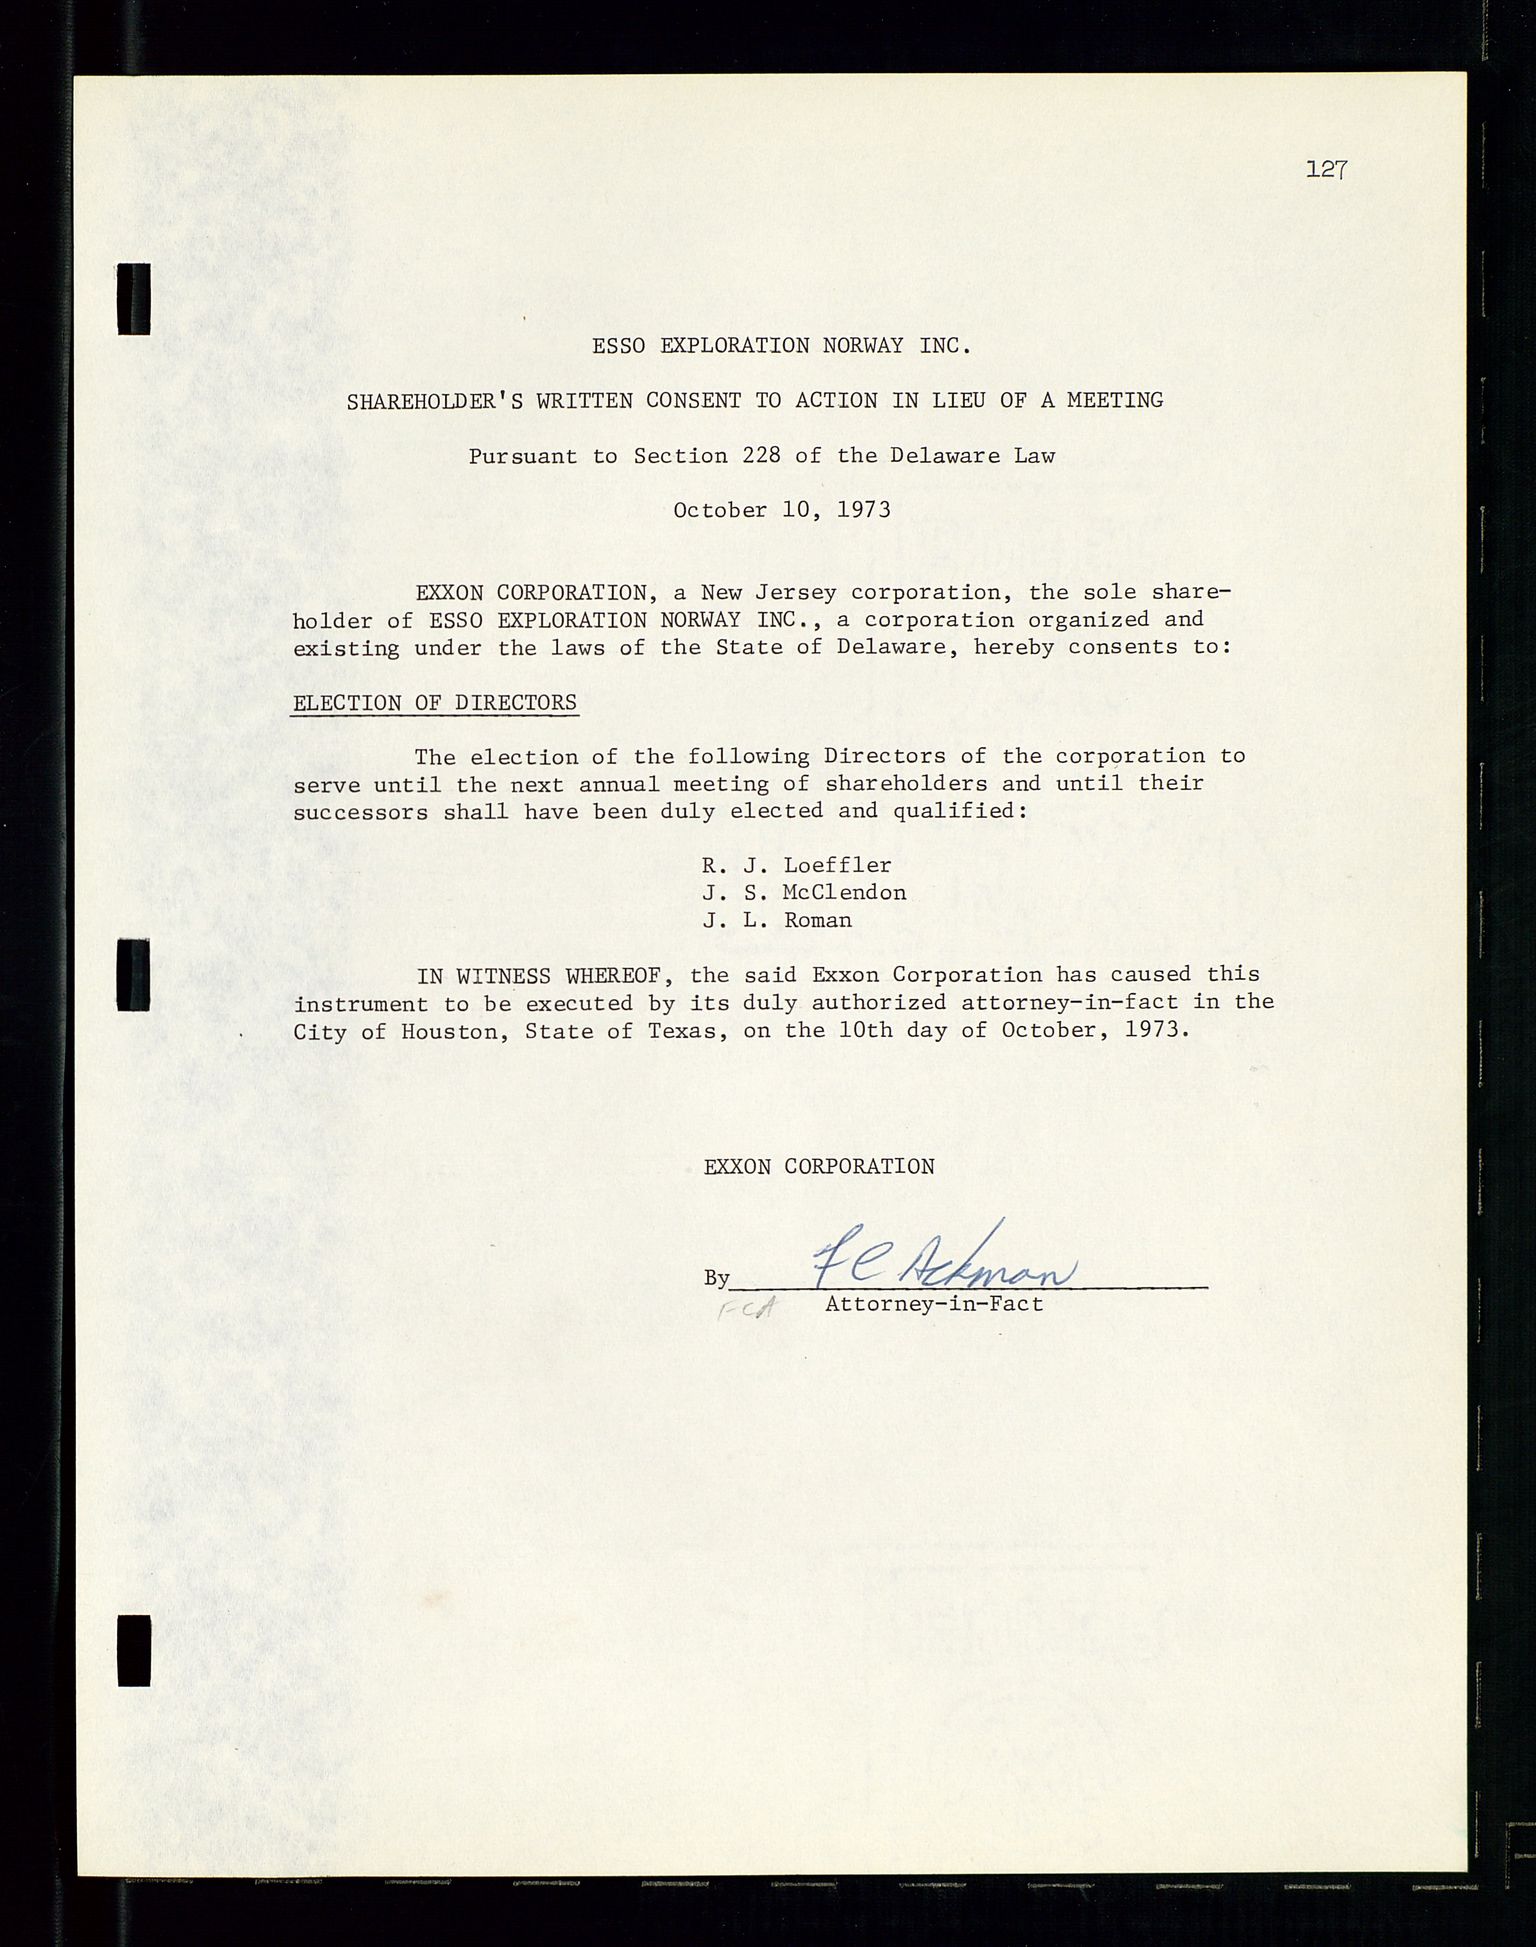 Pa 1512 - Esso Exploration and Production Norway Inc., SAST/A-101917/A/Aa/L0001/0001: Styredokumenter / Corporate records, By-Laws, Board meeting minutes, Incorporations, 1965-1975, s. 127